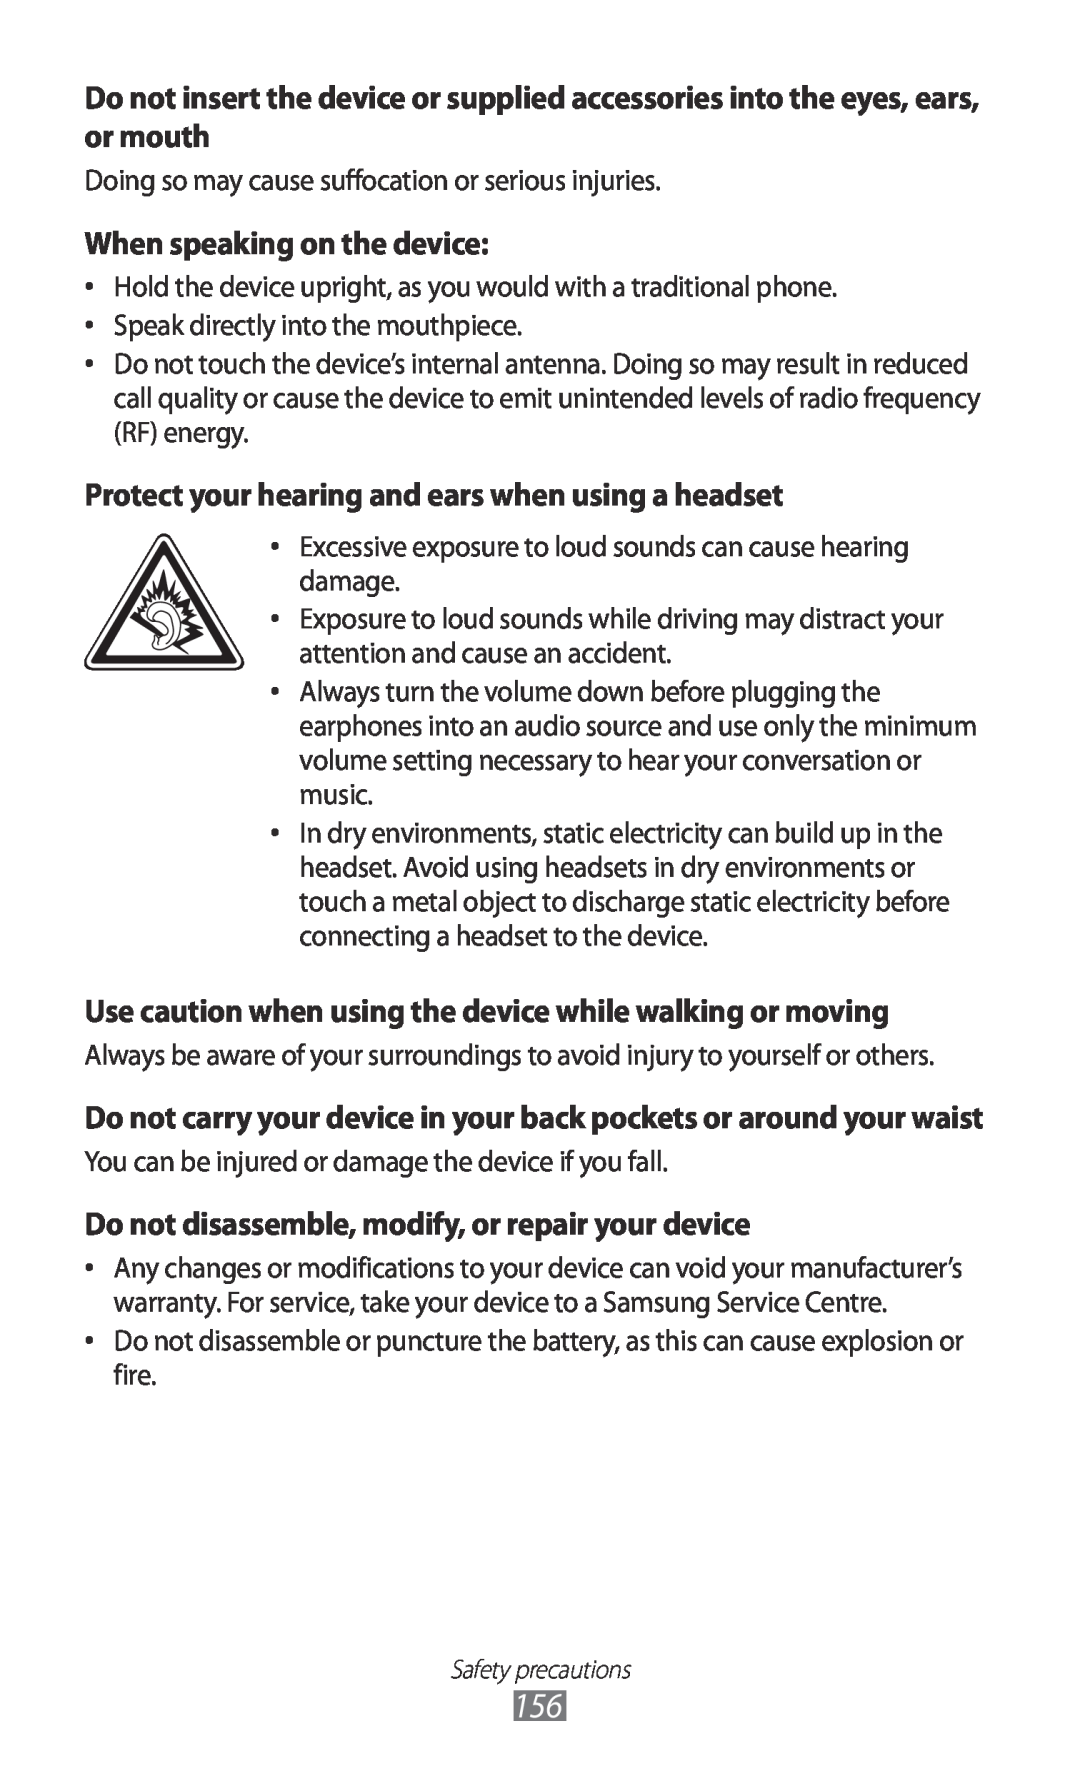 Samsung GT-I9070 user manual When speaking on the device, Protect your hearing and ears when using a headset 